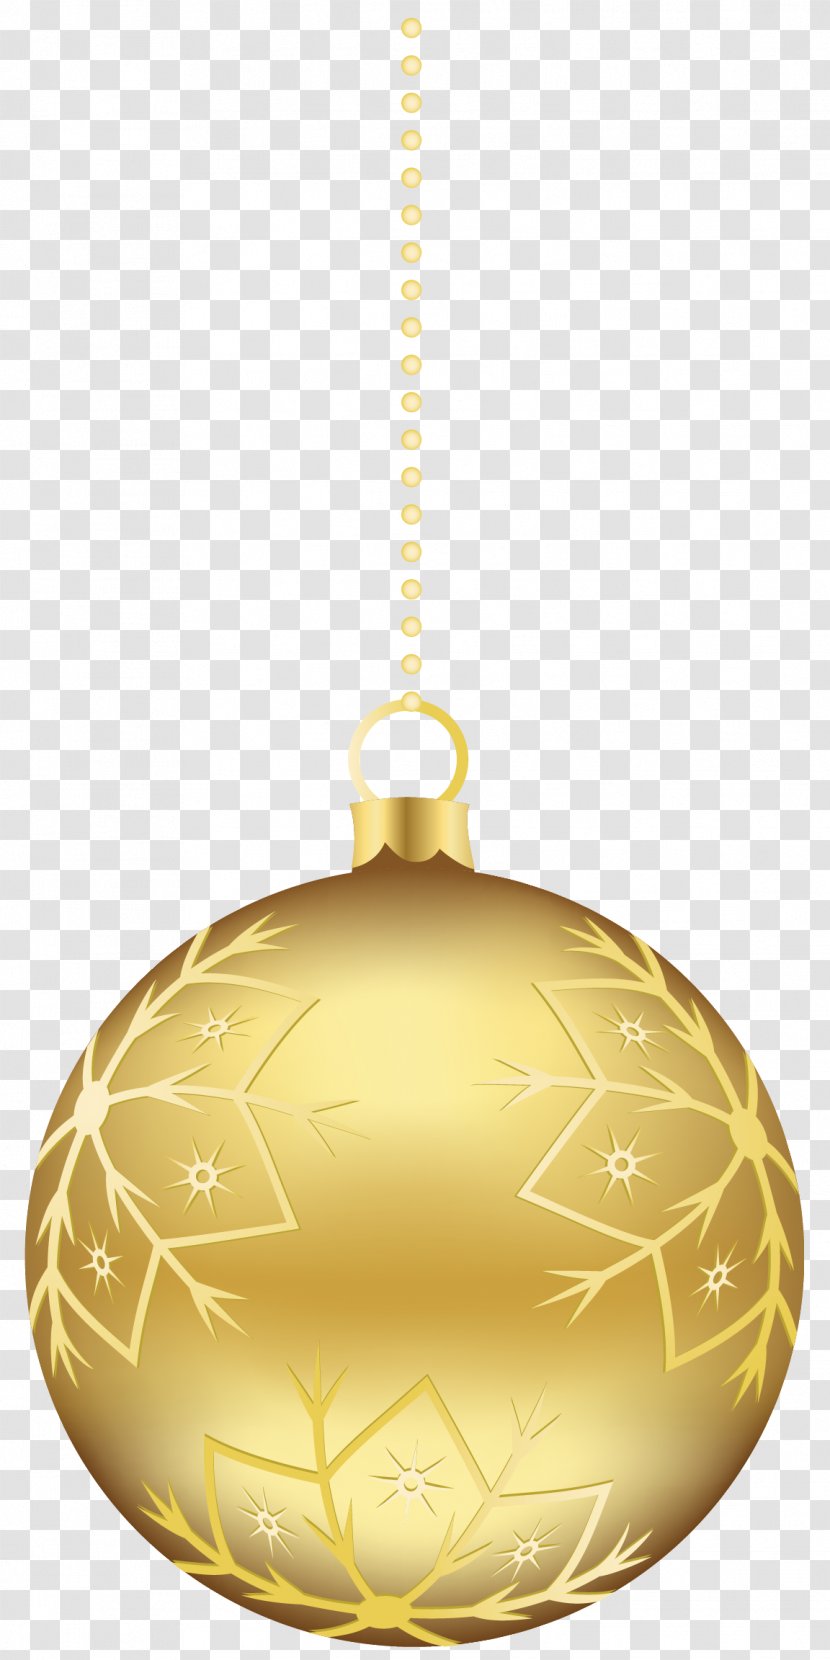 Christmas Ornament Decoration Gold Clip Art - Holiday - Images Of Ornaments Transparent PNG